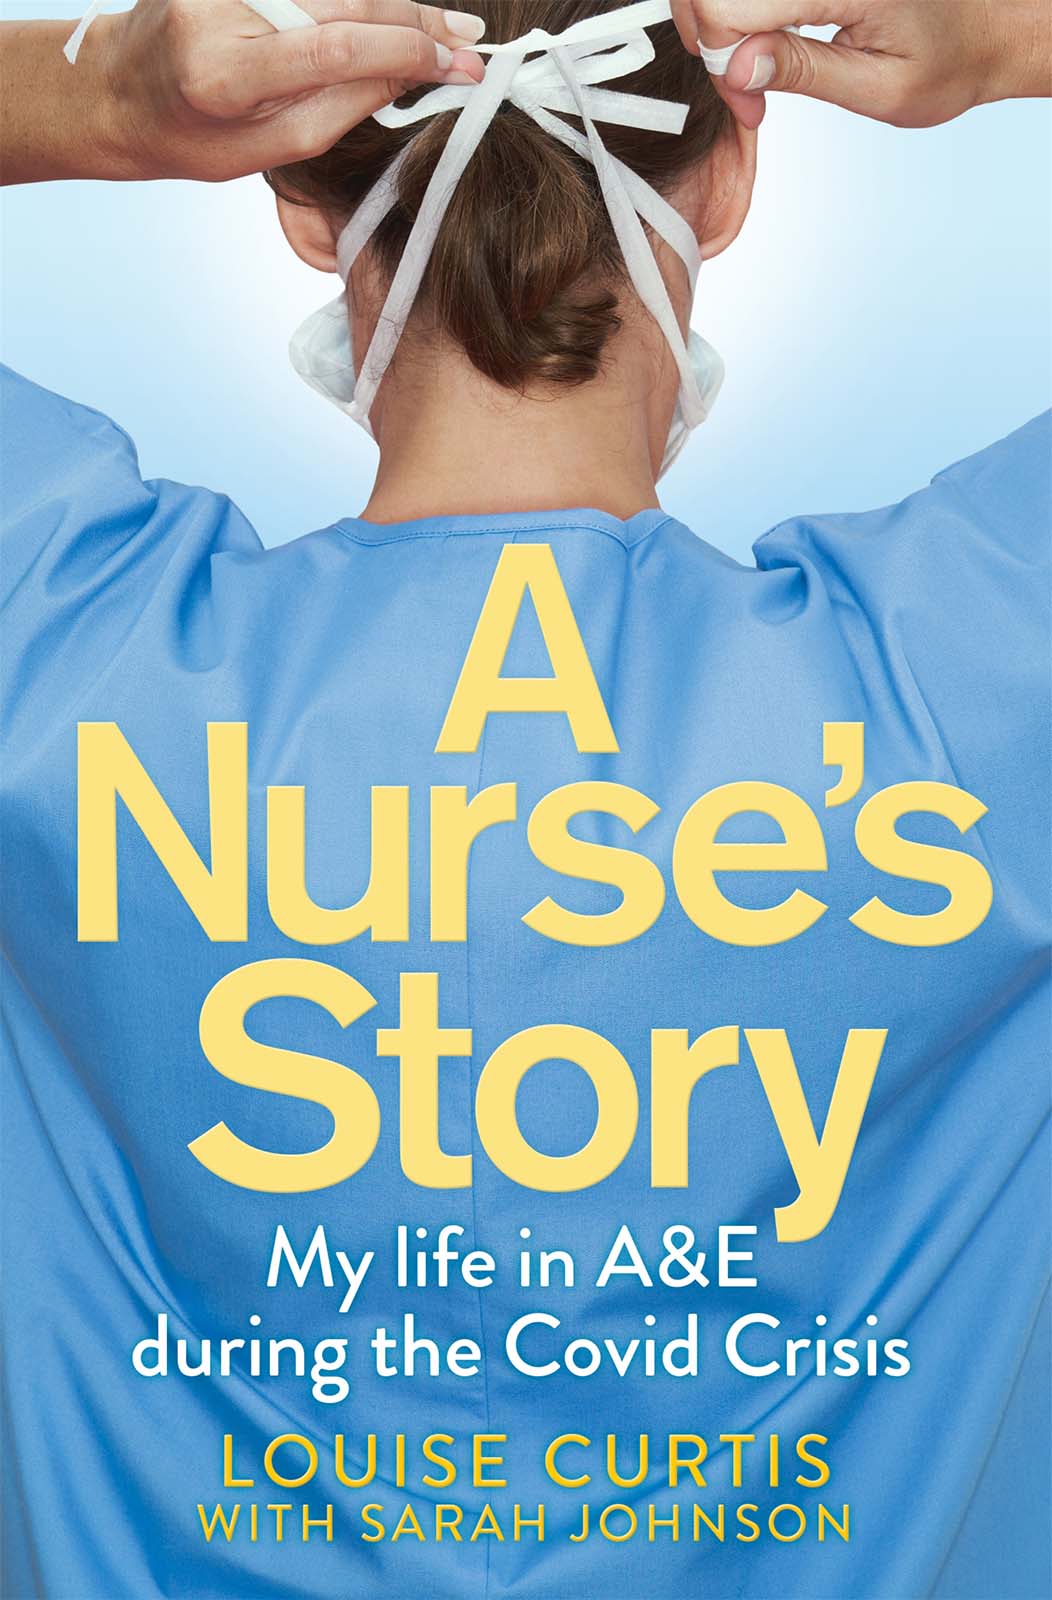 A Nurses Story My Life in AE During the Covid Crisis - image 1